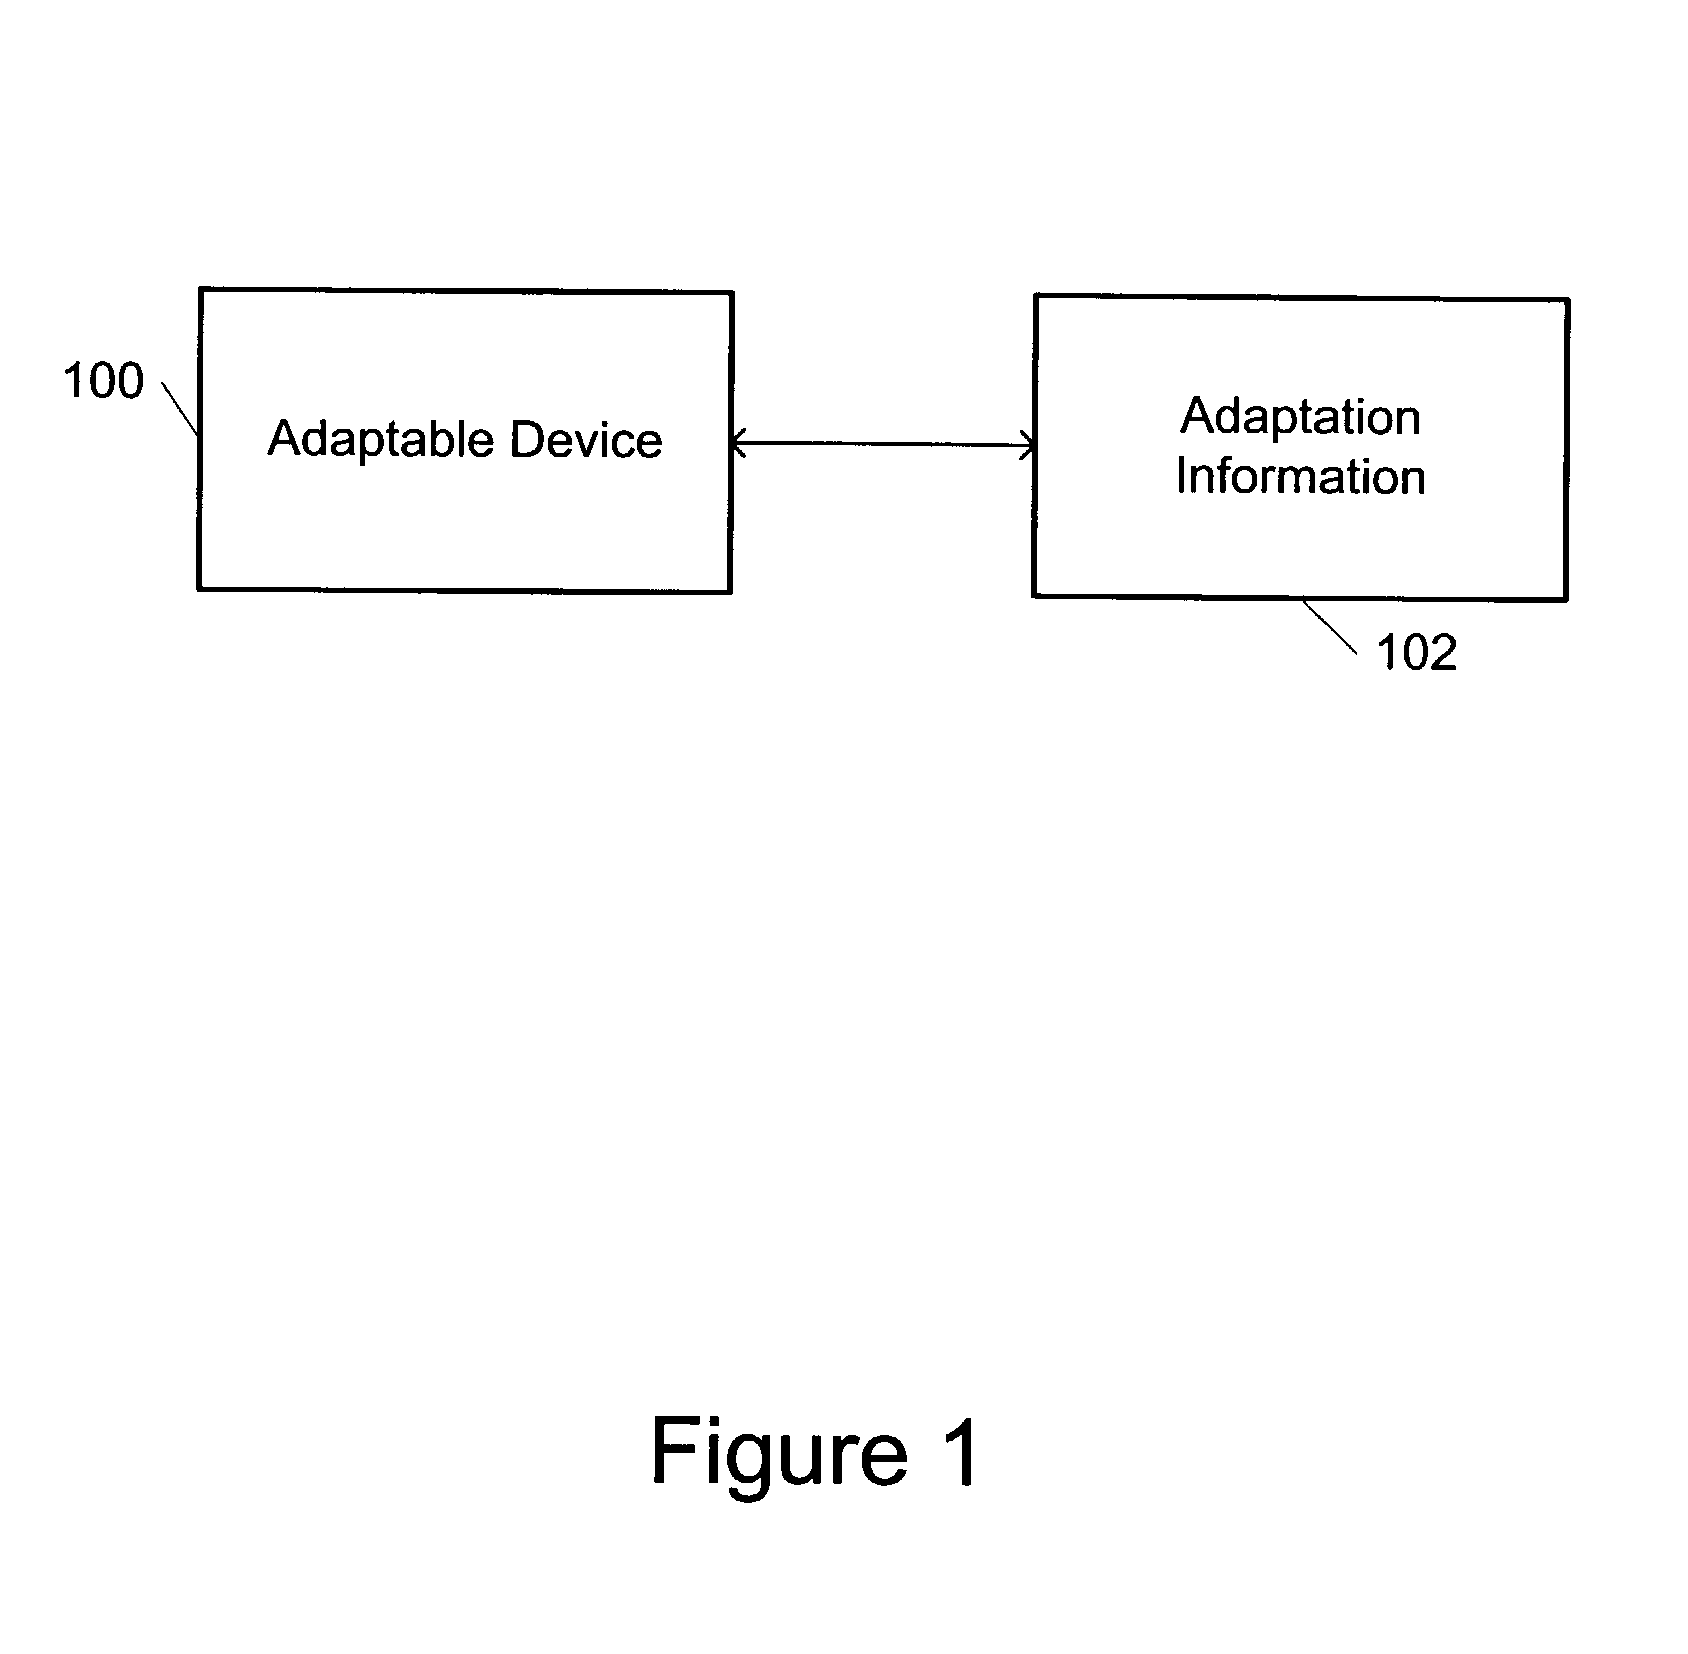 Method and system for providing a device which can be adapted on an ongoing basis